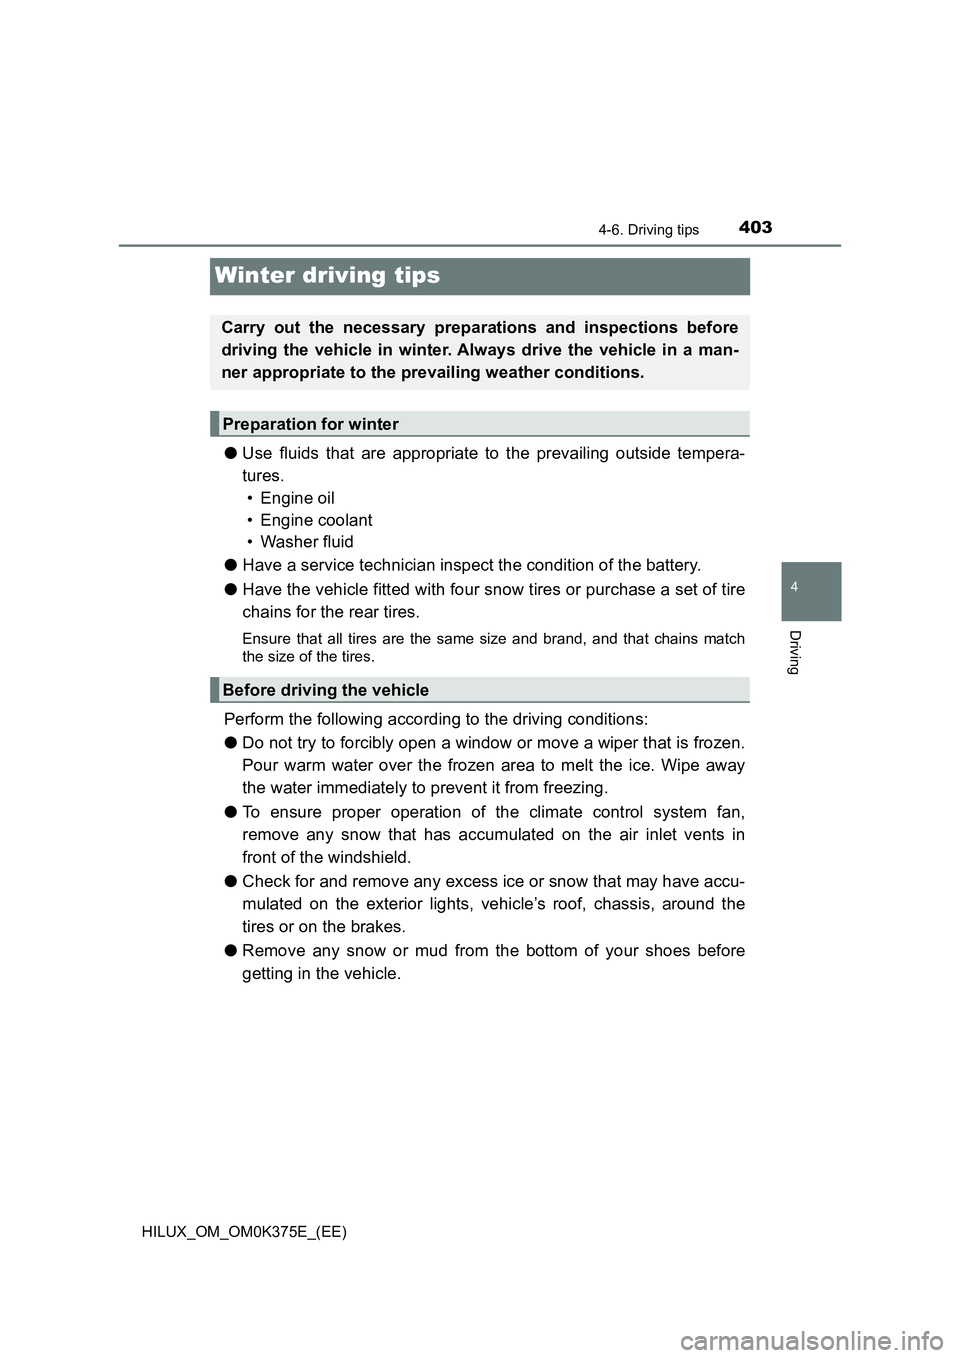 TOYOTA HILUX 2018  Owners Manual 403
4
4-6. Driving tips
Driving
HILUX_OM_OM0K375E_(EE)
Winter driving tips
●Use fluids that are appropriate to the prevailing outside tempera- 
tures. 
• Engine oil 
• Engine coolant 
• Washer